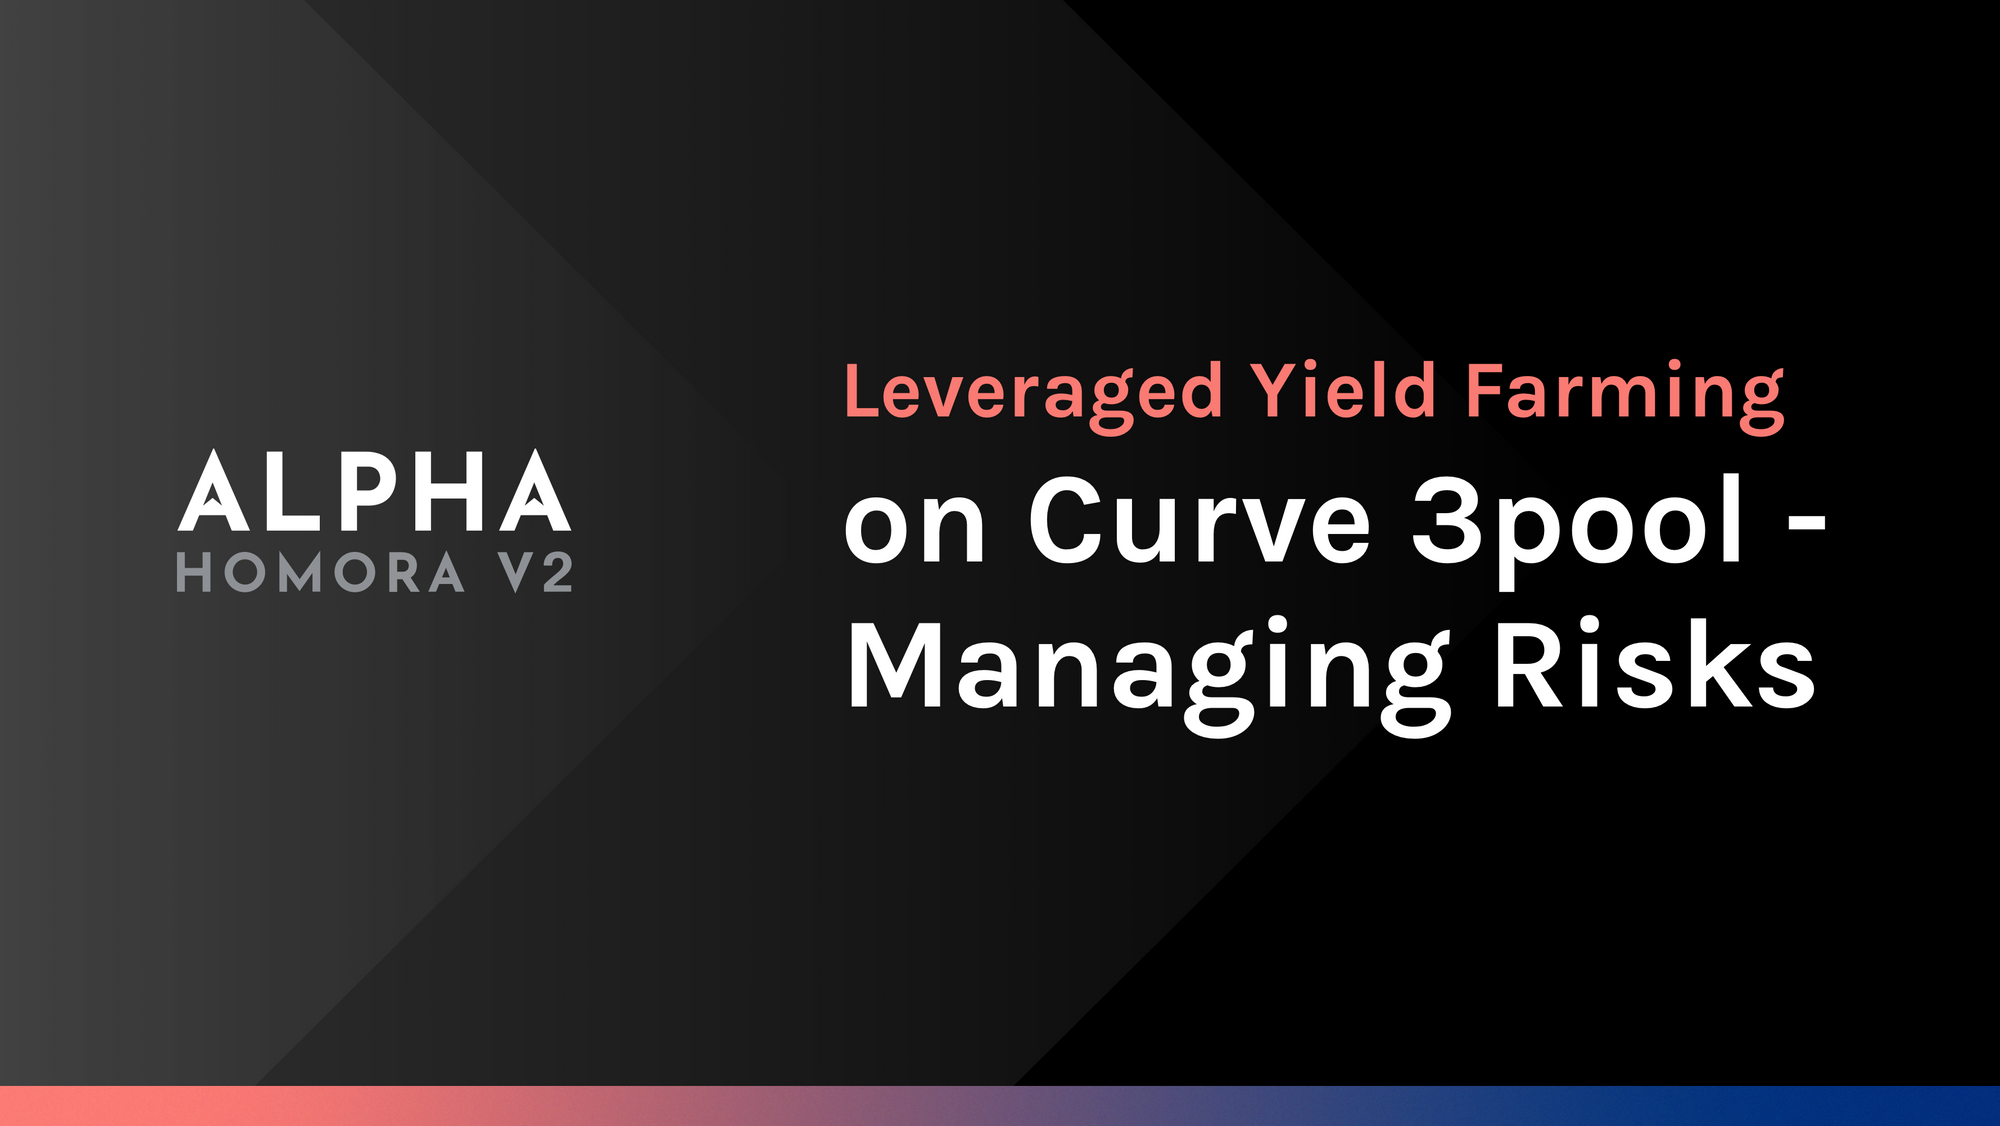 Leverage Yield Farming on Curve 3pool - Managing Risks